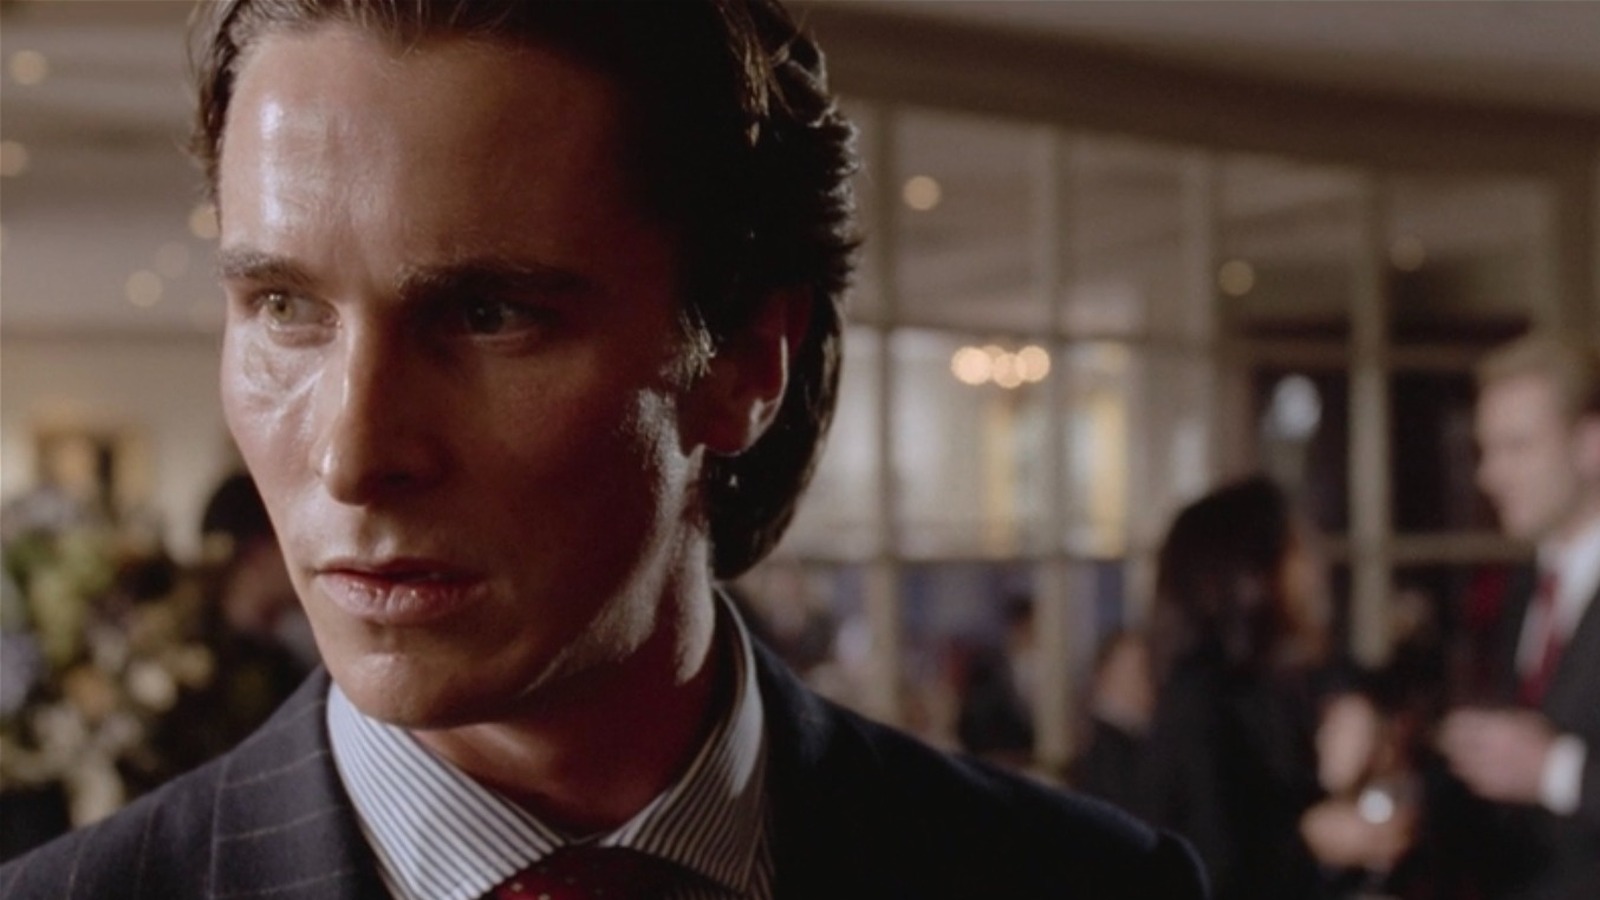 Mary Harron Narrates a Scene From 'American Psycho' - The New York Times